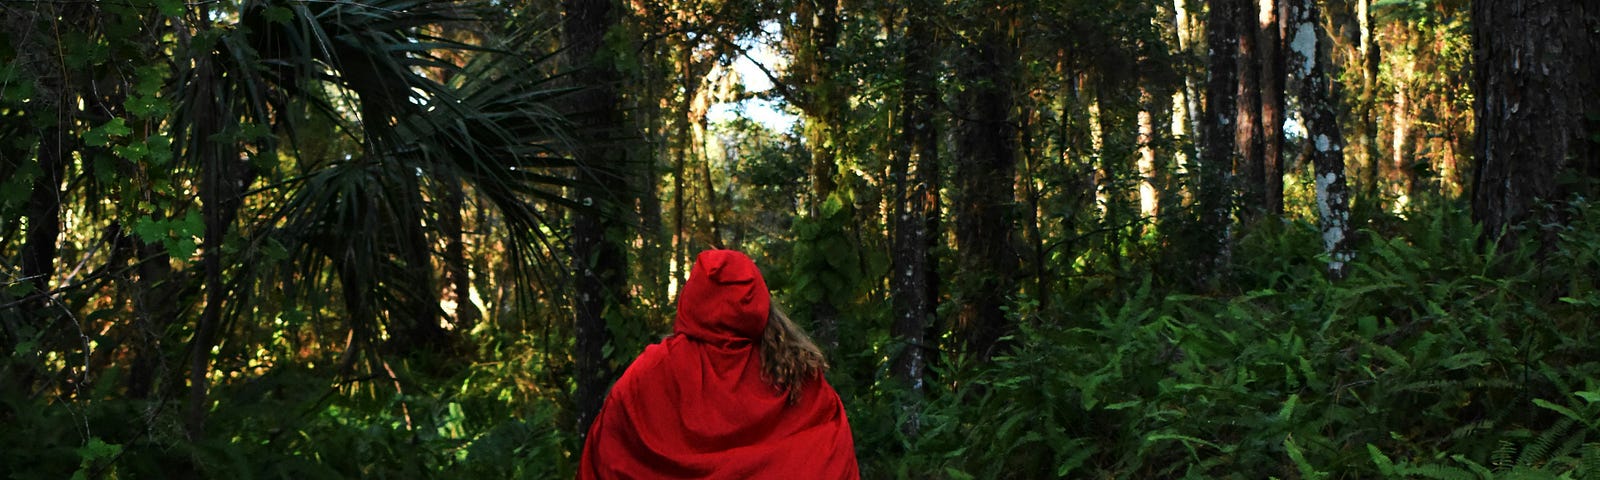 Red Riding Hood running in the forest— photo by Chelsey Marques on Unsplash